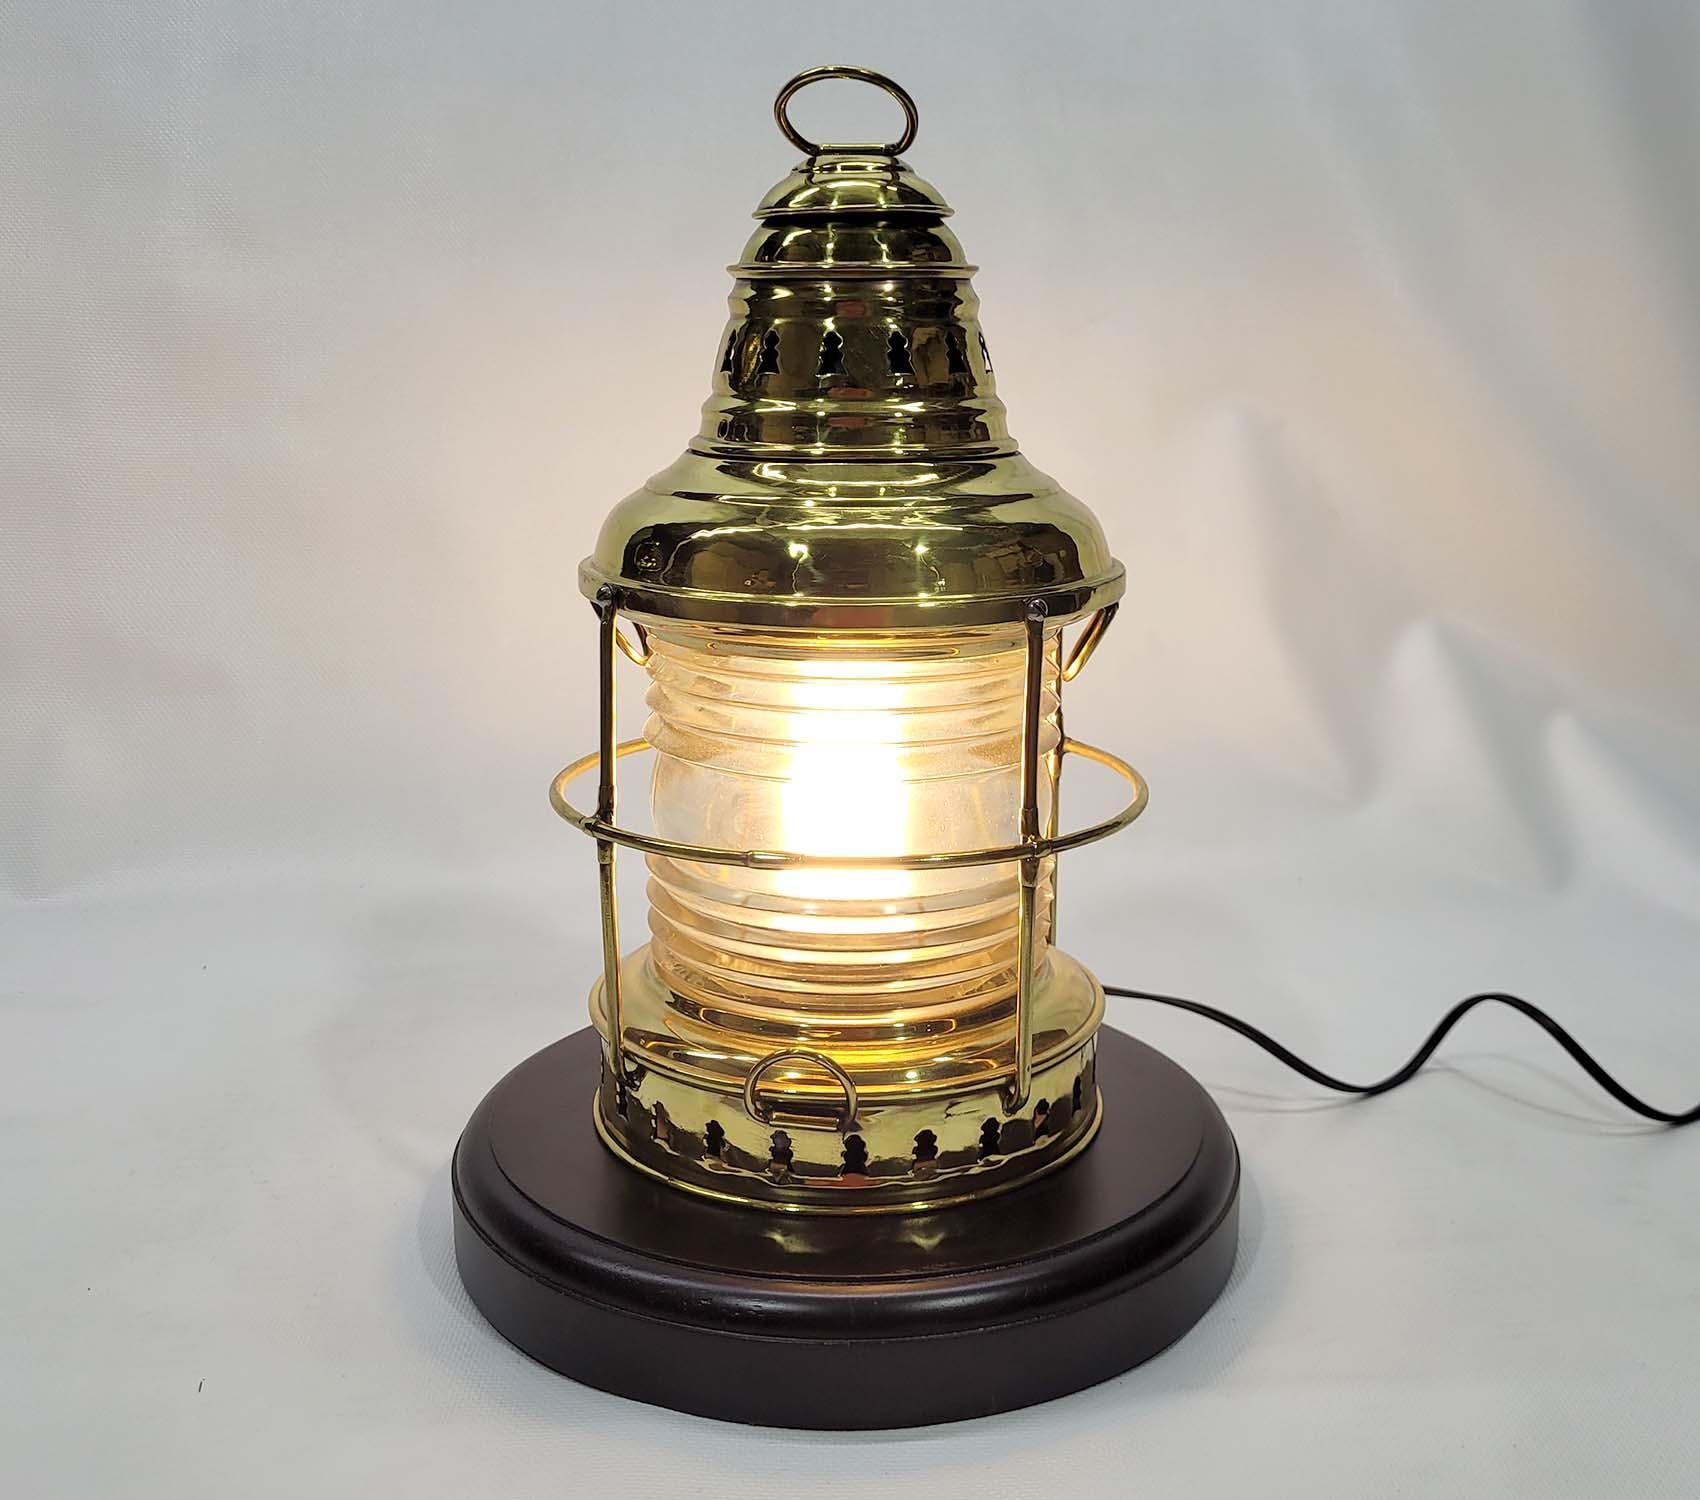 Brass Yacht Lantern with Fresnel Lens In Good Condition For Sale In Norwell, MA